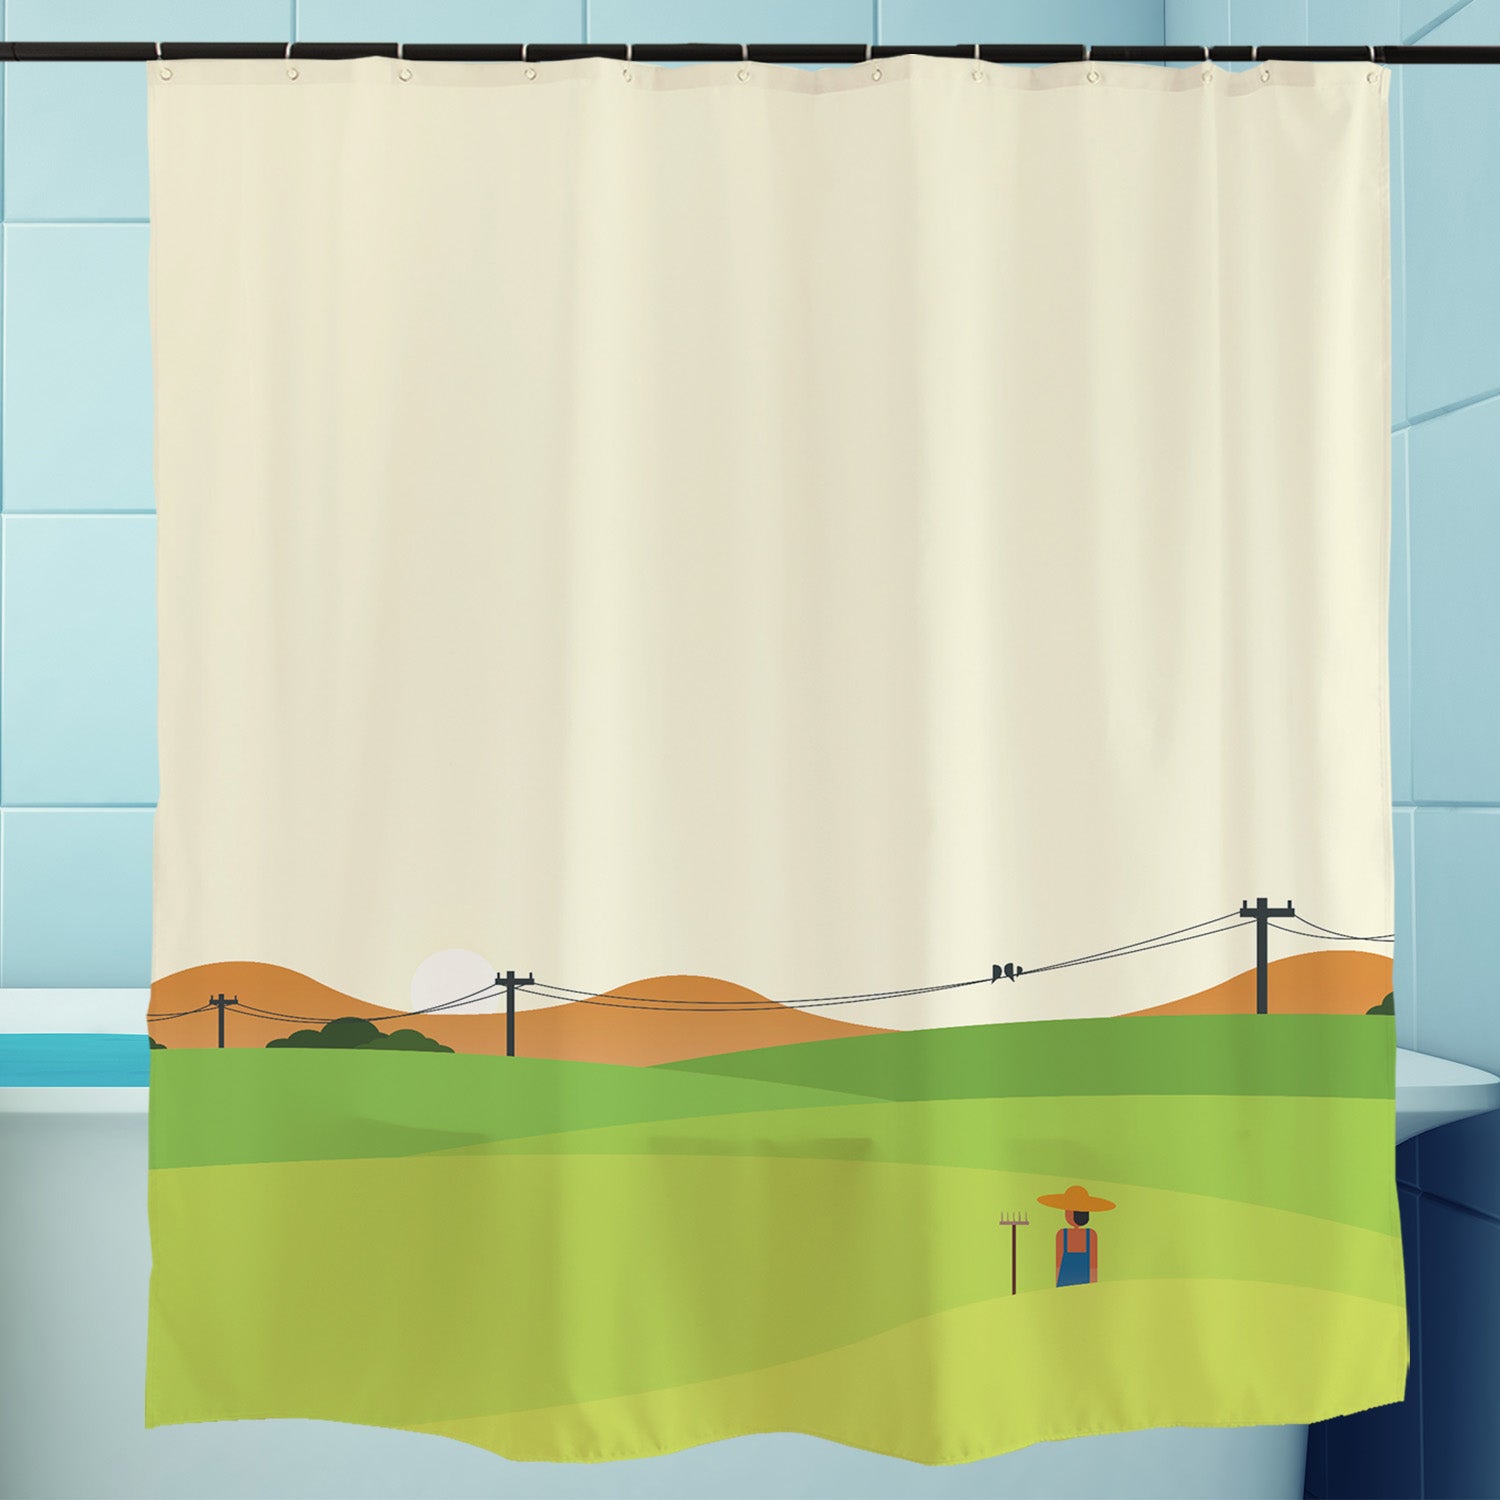 Feblilac Green field Shower Curtain with Hooks